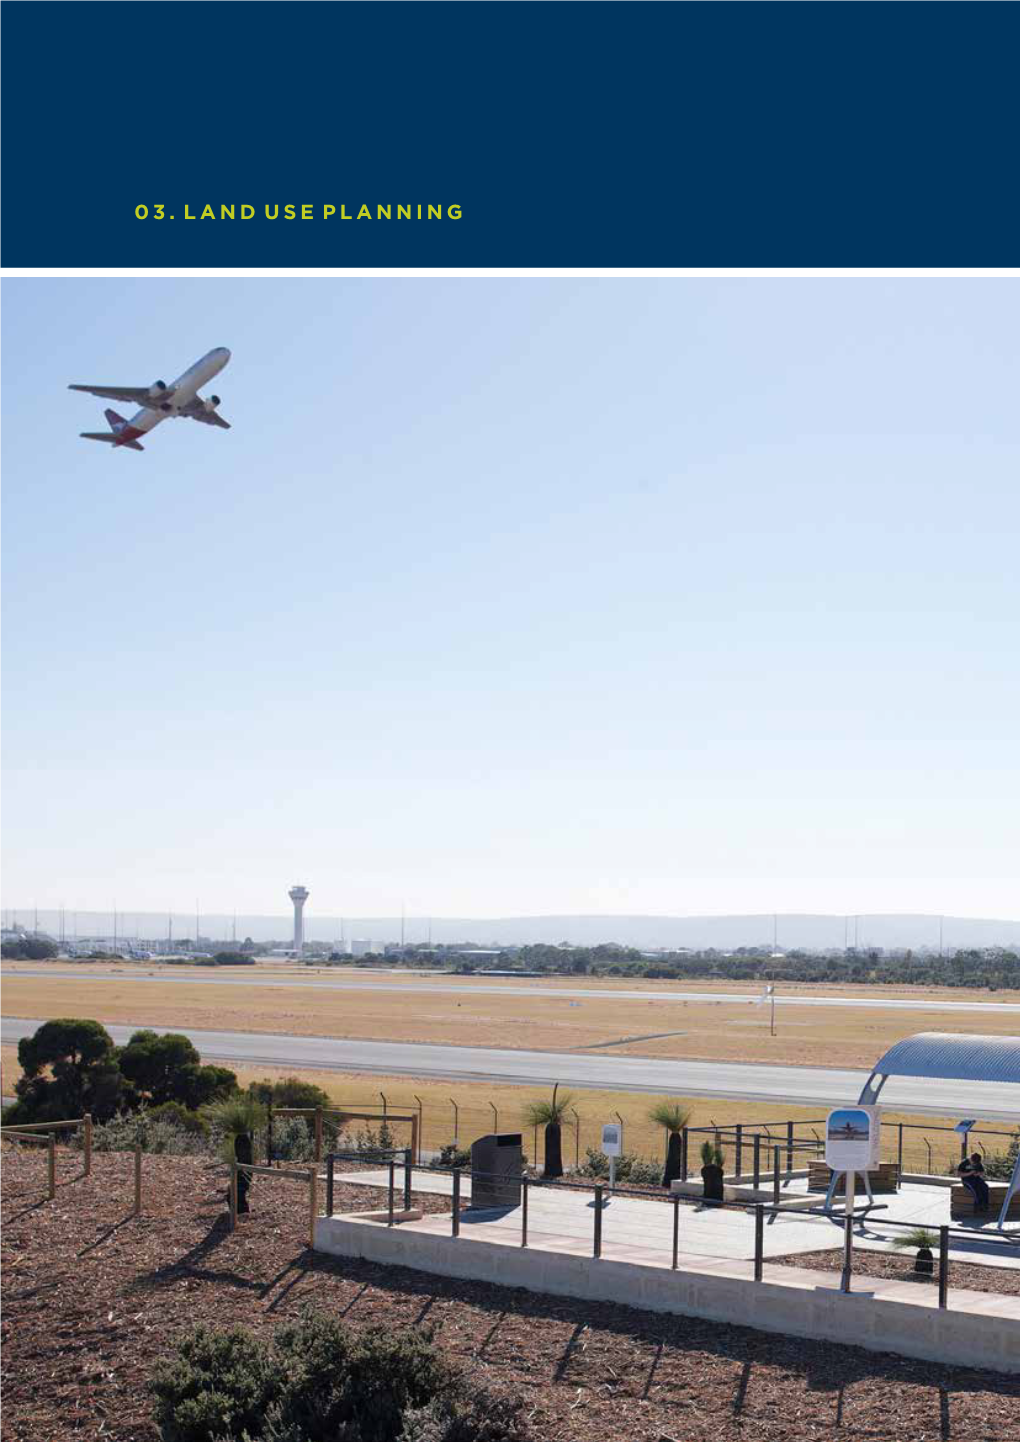 03. LAND USE PLANNING Perth Airport Is One of the Most Important Elements of Public Transport Infrastructure in Western Australia